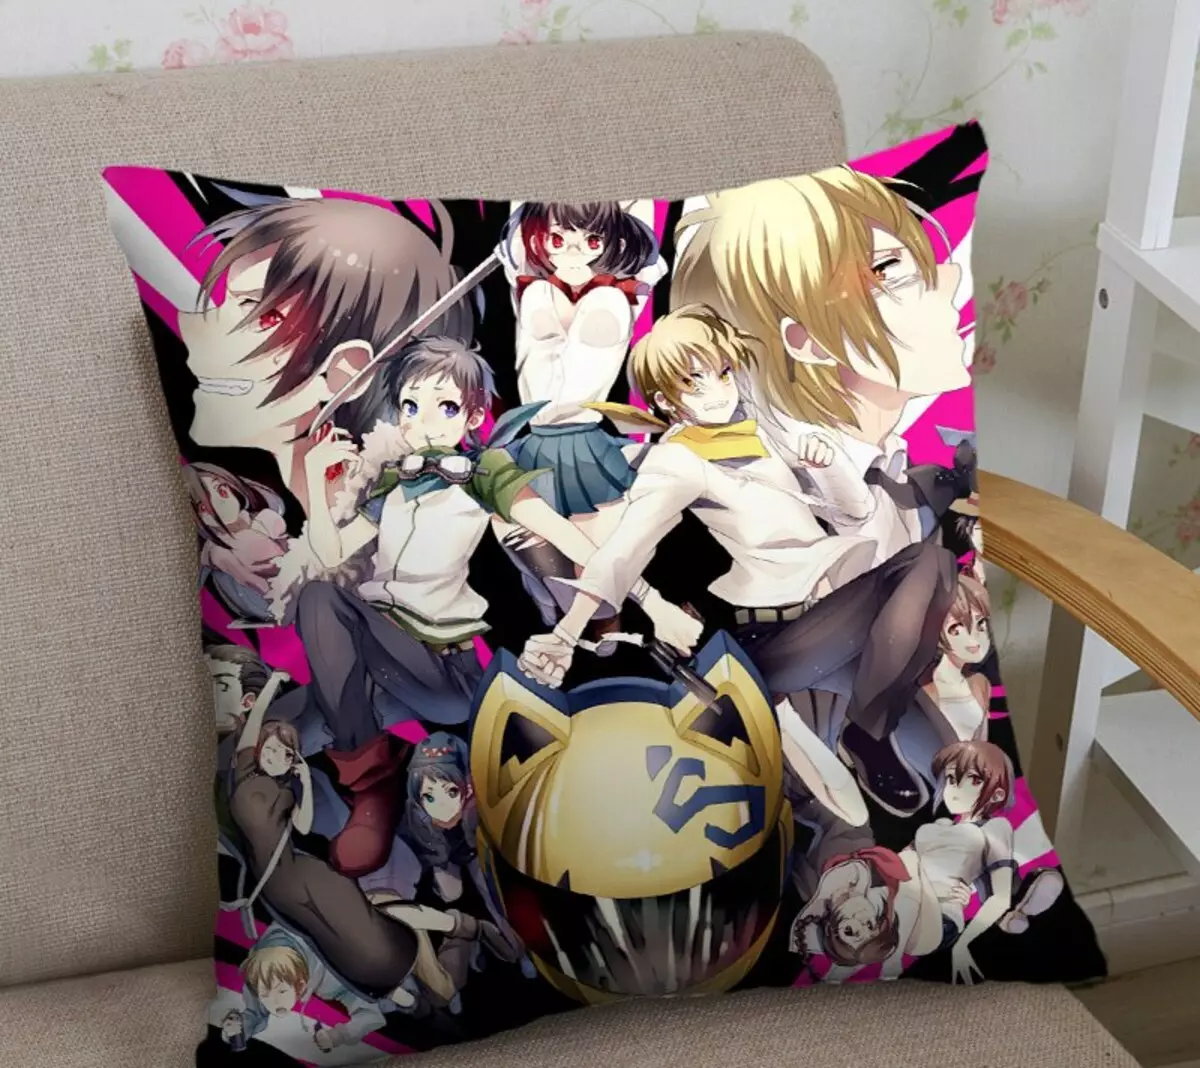 Anime-pillows: Dakimakur hug in full length, long big pillows with a print of girls and other characters 20757_12